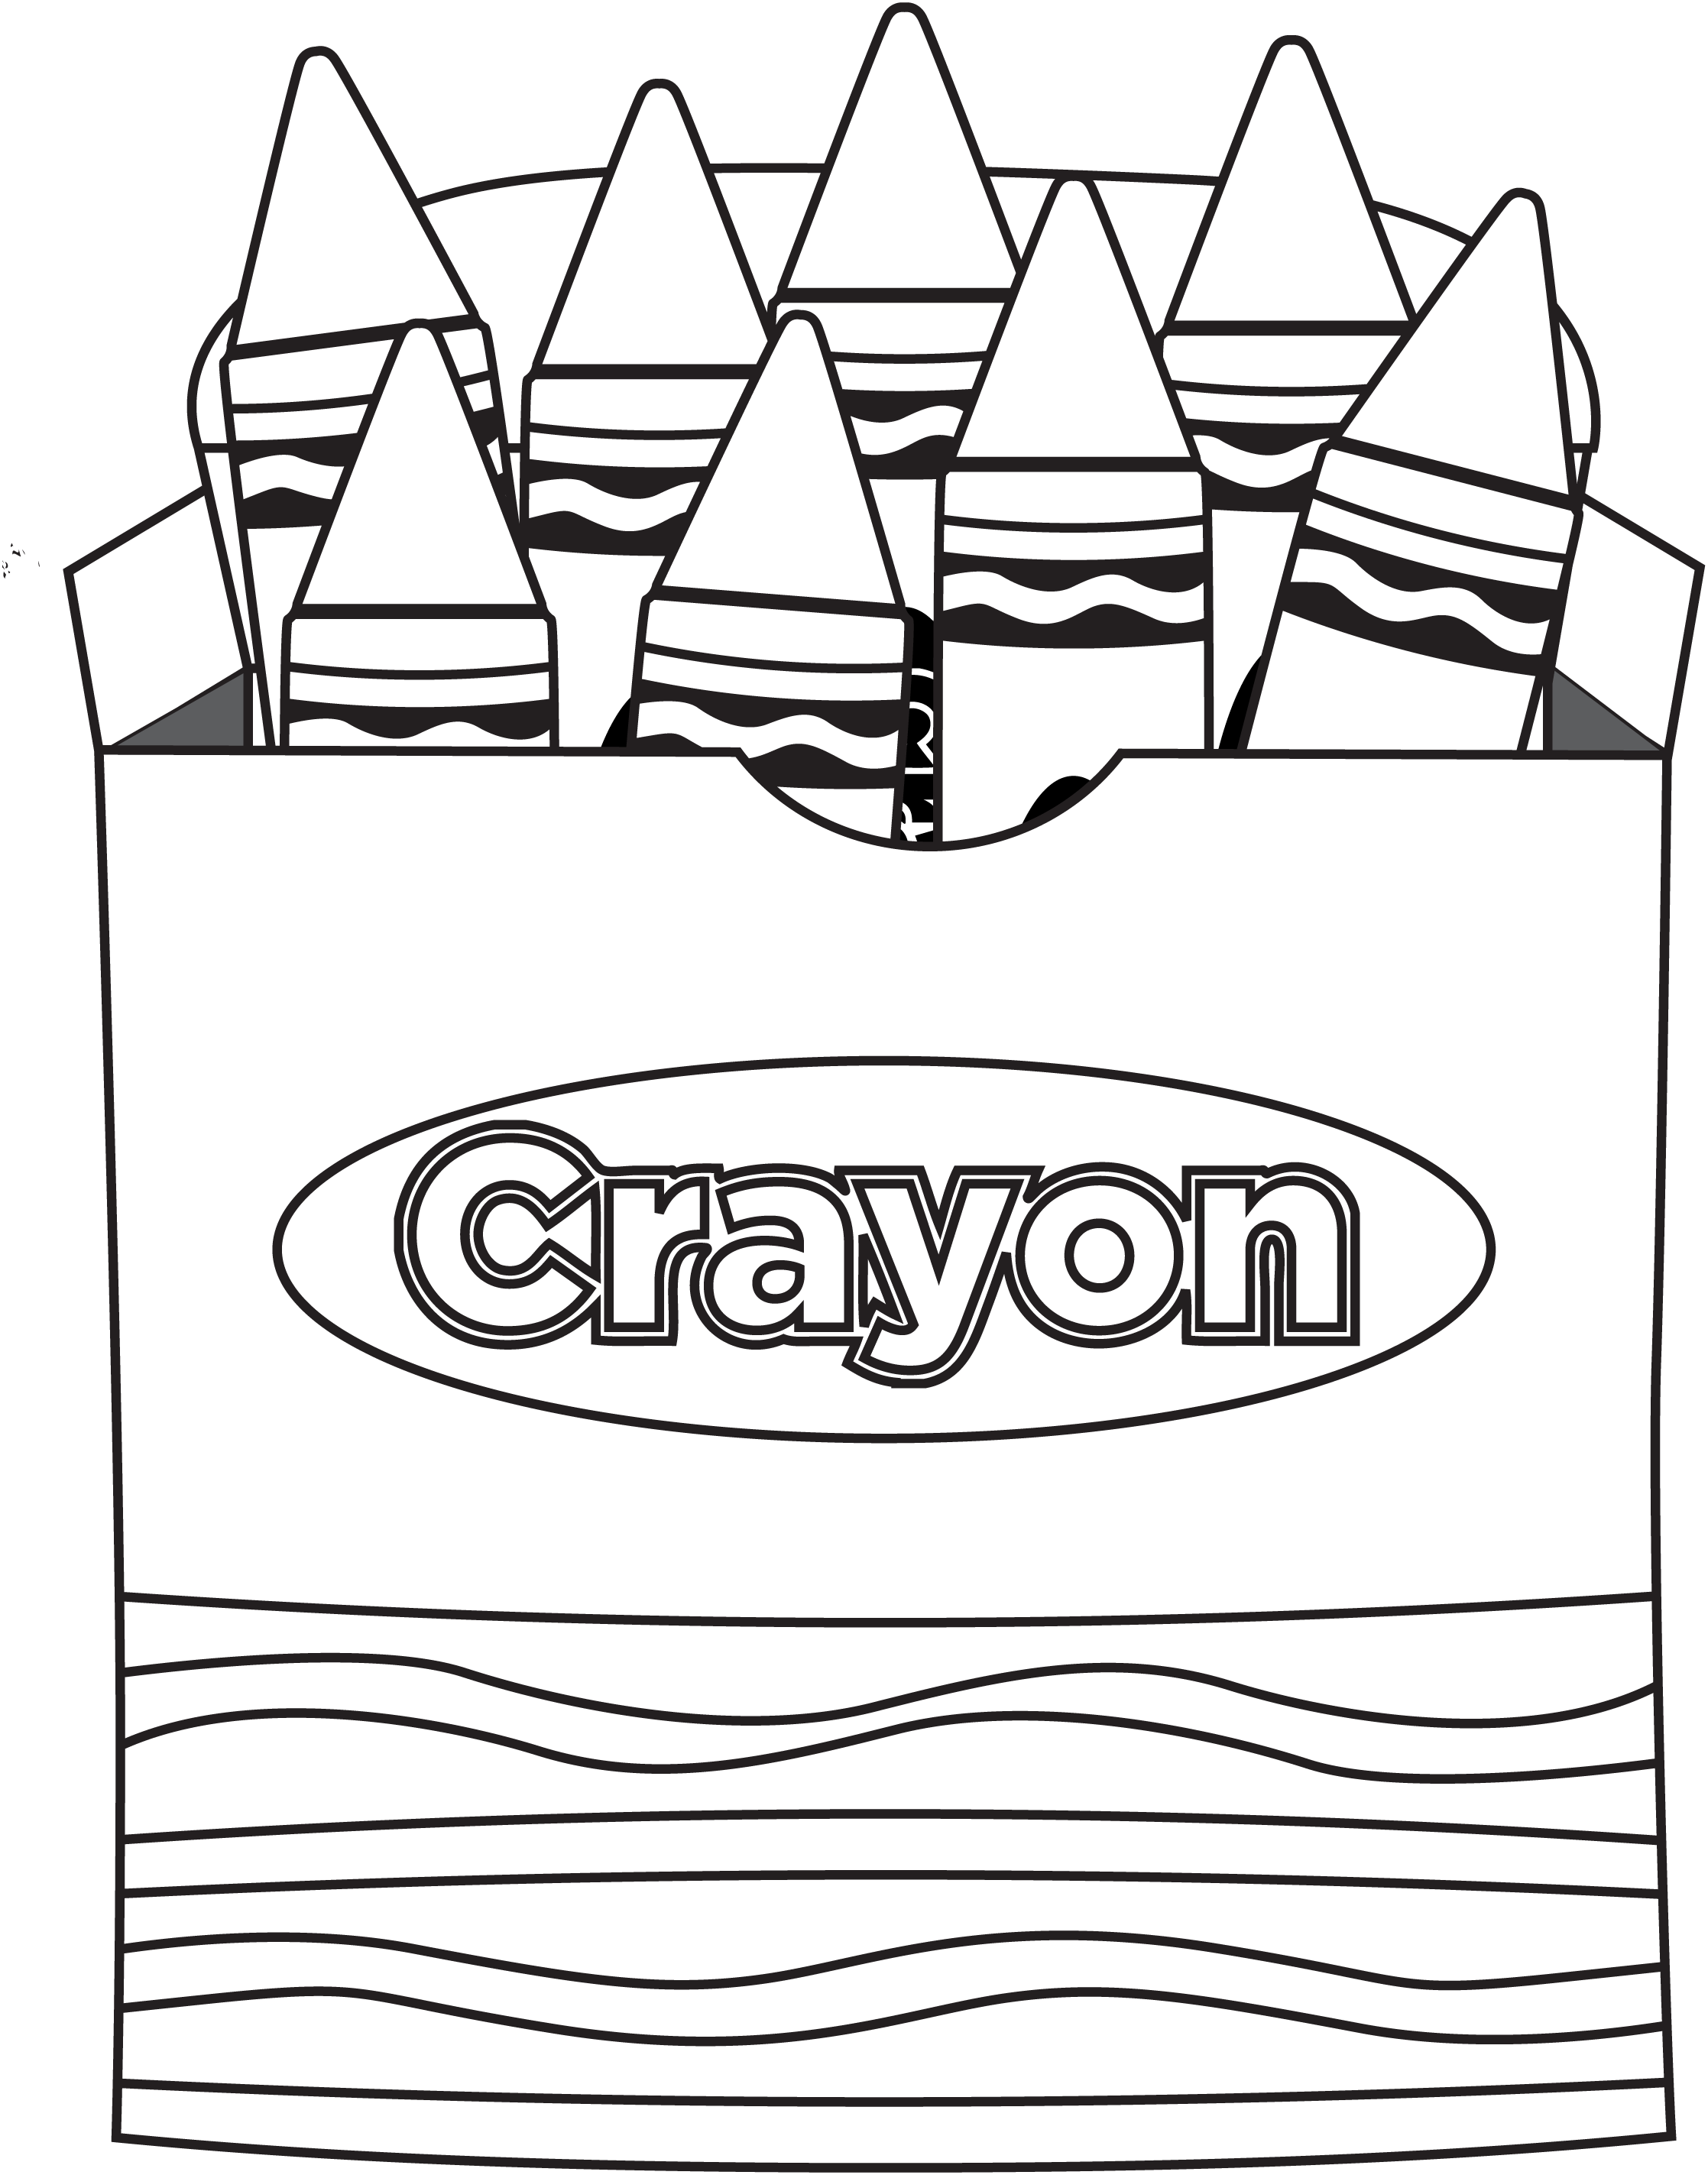 The Day The Crayons Quit Coloring Page - Coloring Home